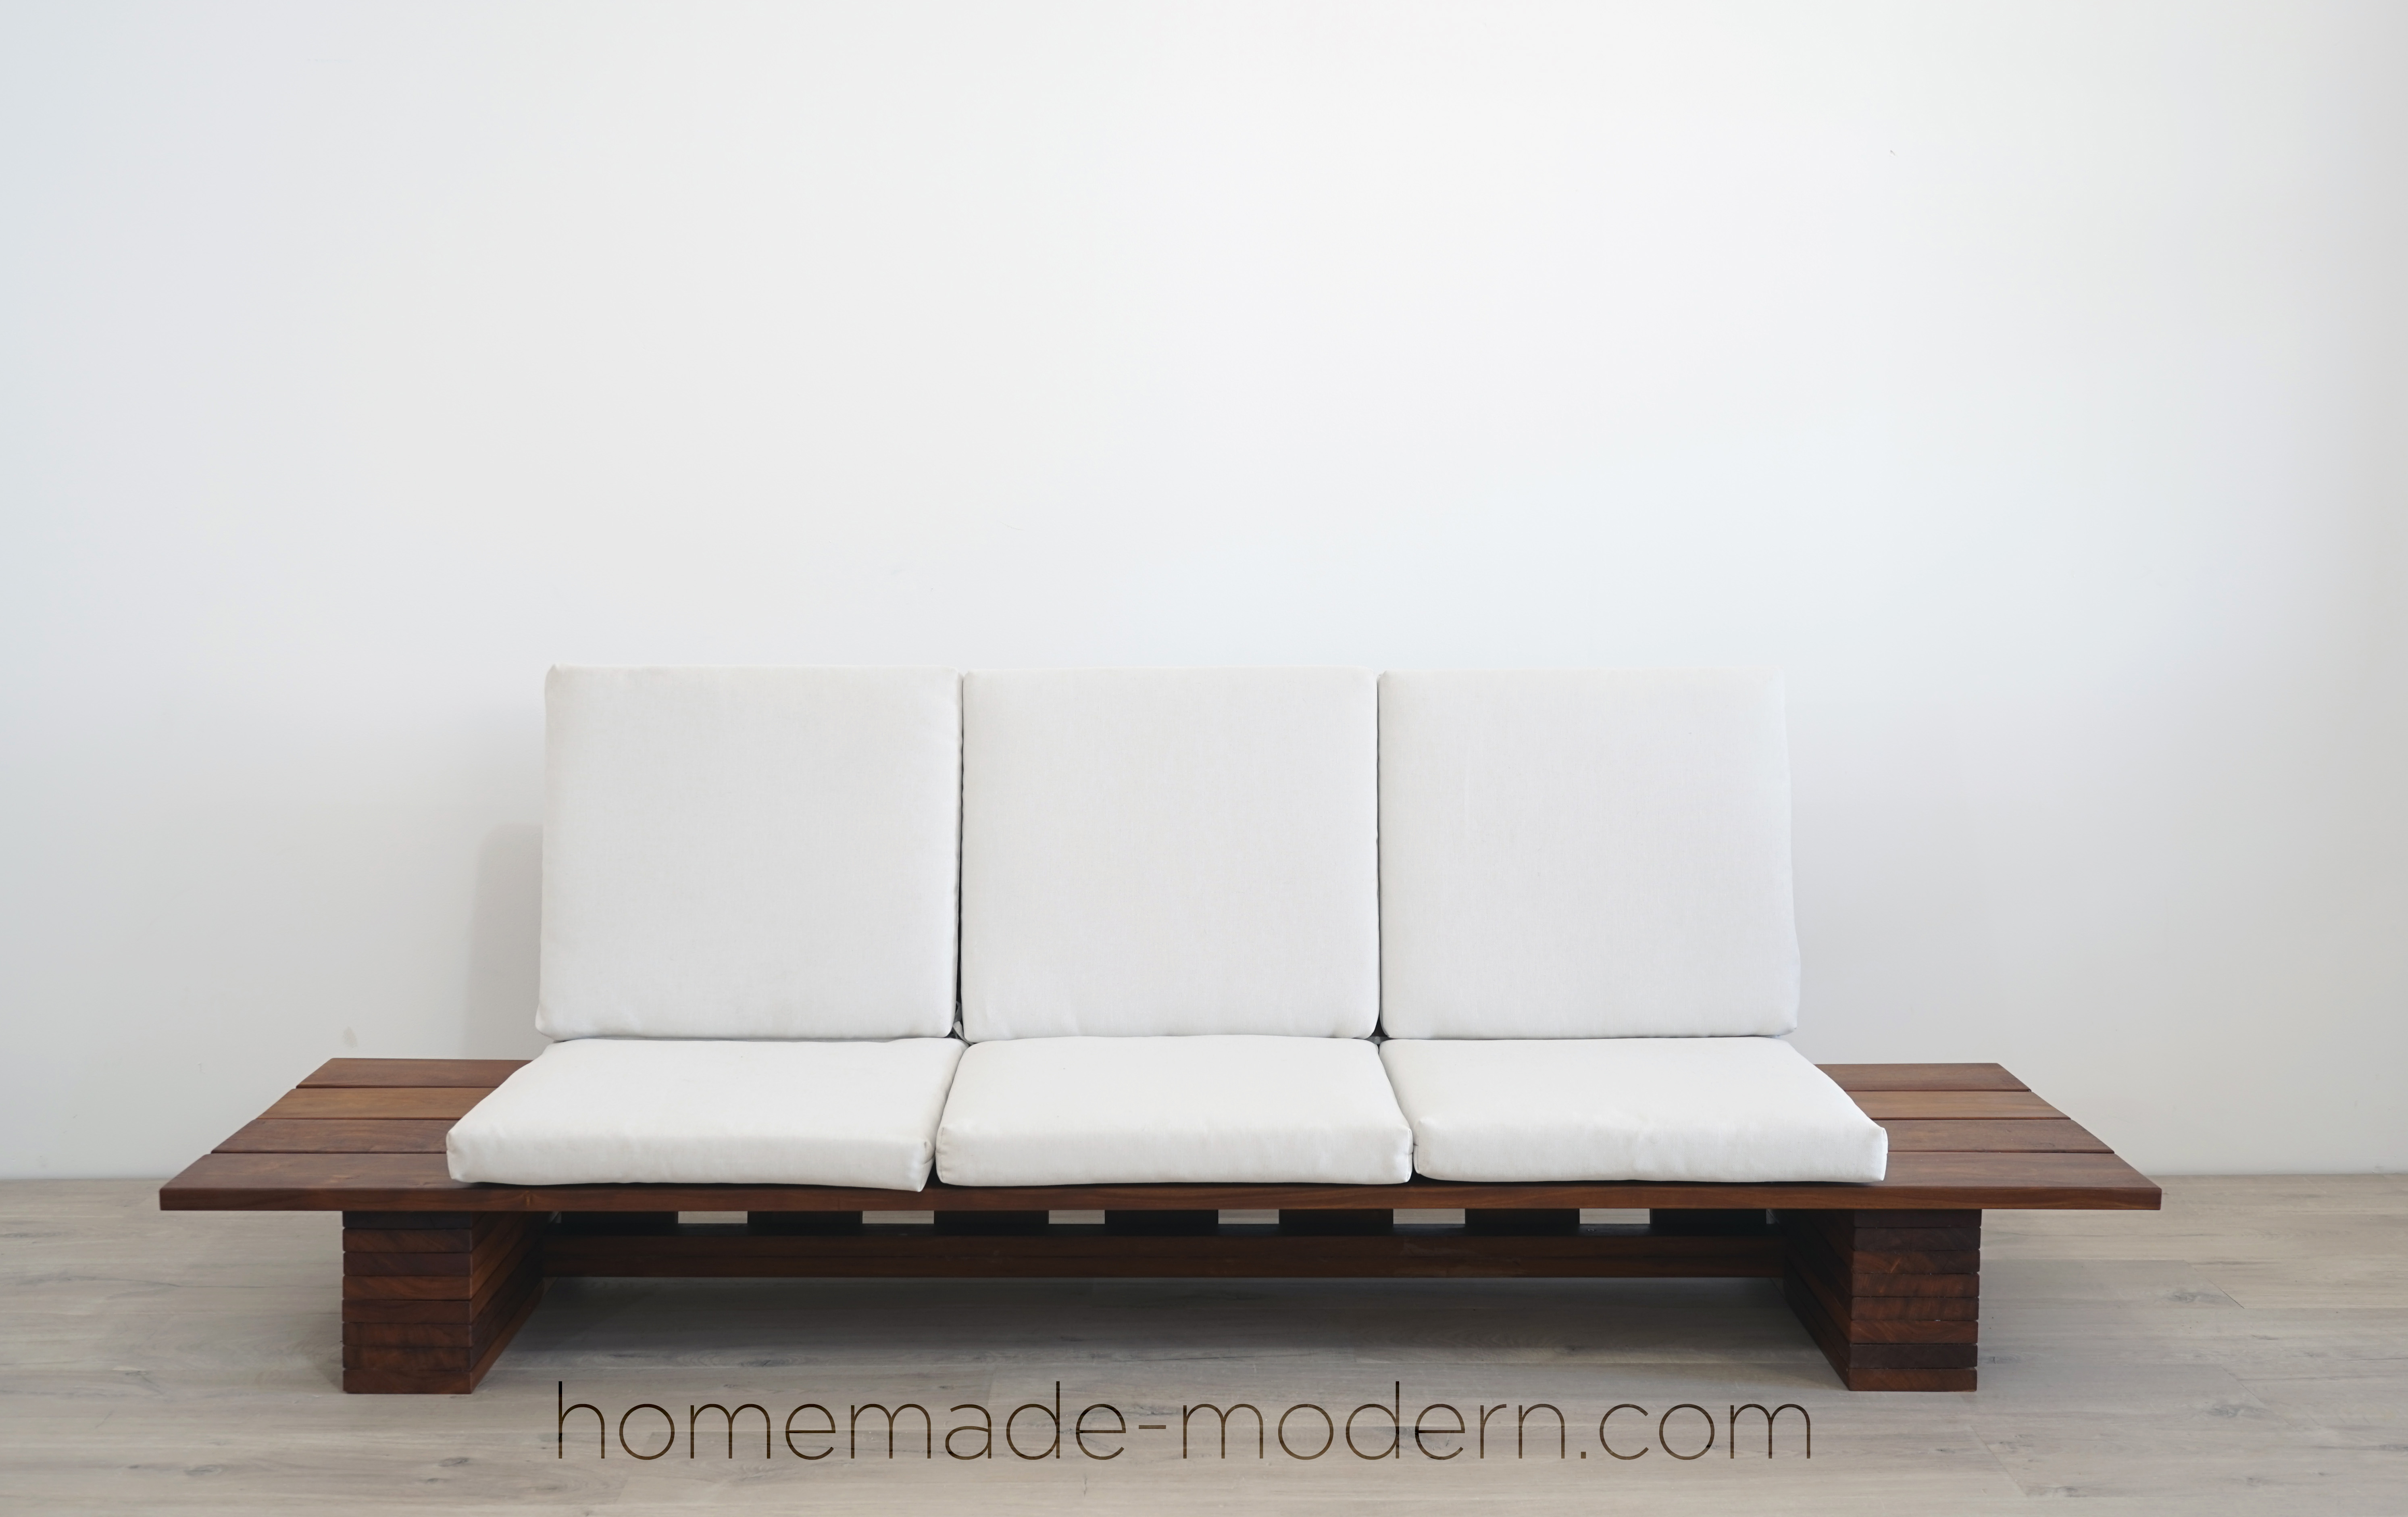 This DIY Outdoor sofa was made out of Cumaru Deck boards and outdoor cushions from Target. For more information go to HomeMade-Modern.com